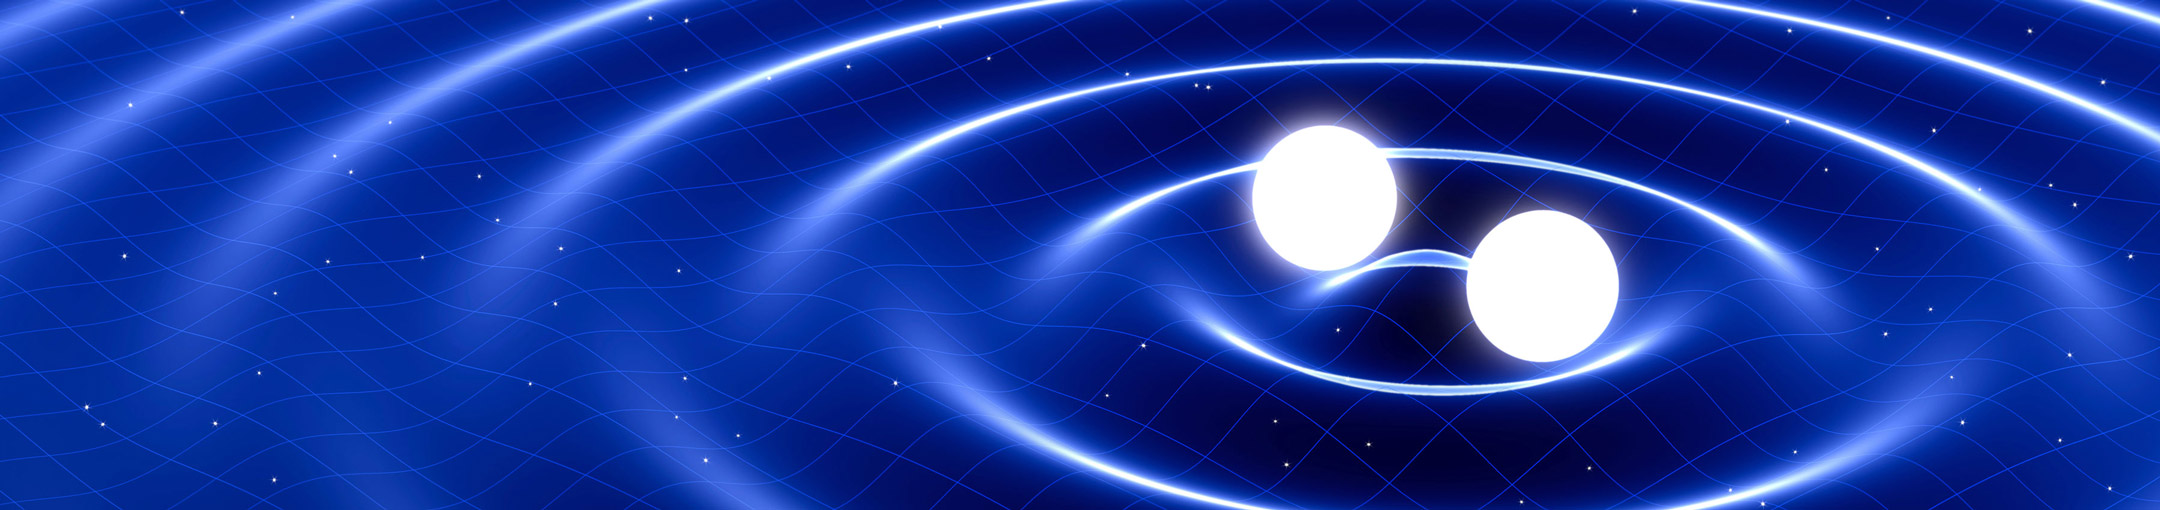 A mostly blue artistic rendering of two white balls creating a ripple effect.